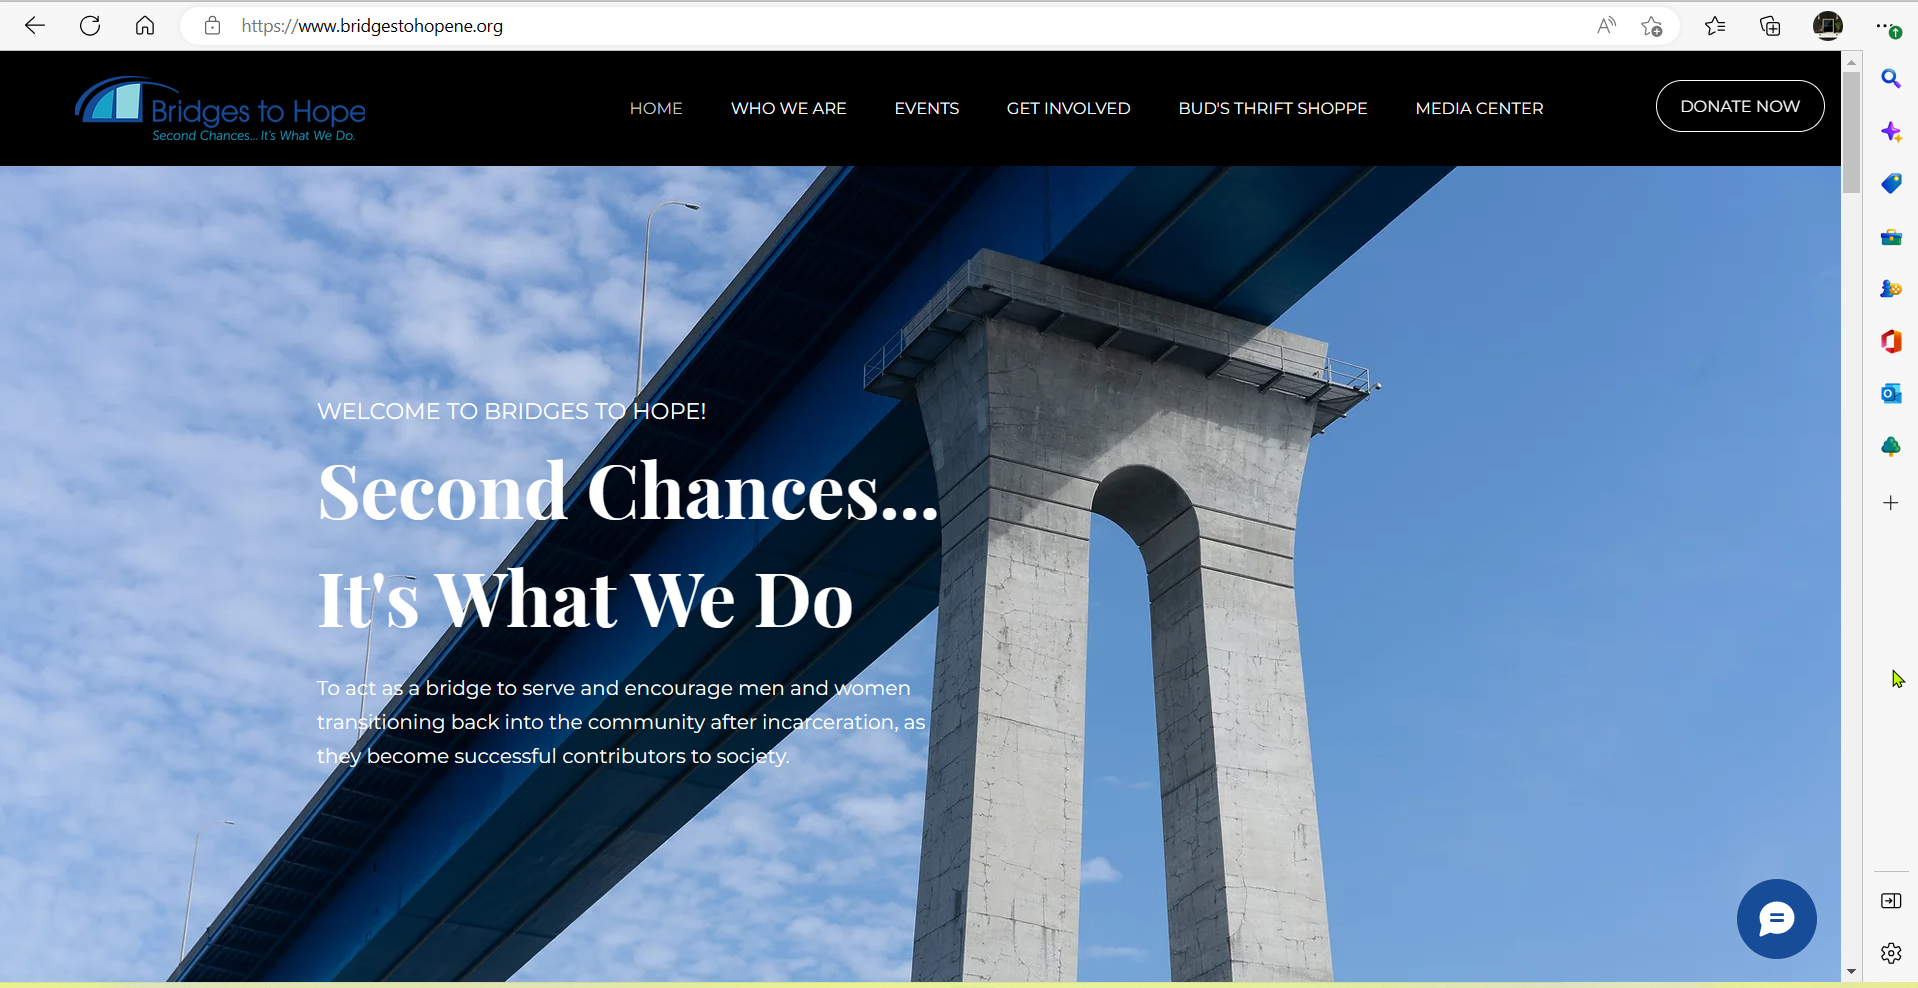 NAOSSOFT has developed a new and improved website for Bridges To Hope, a nonprofit organization based in Lincoln, Nebraska